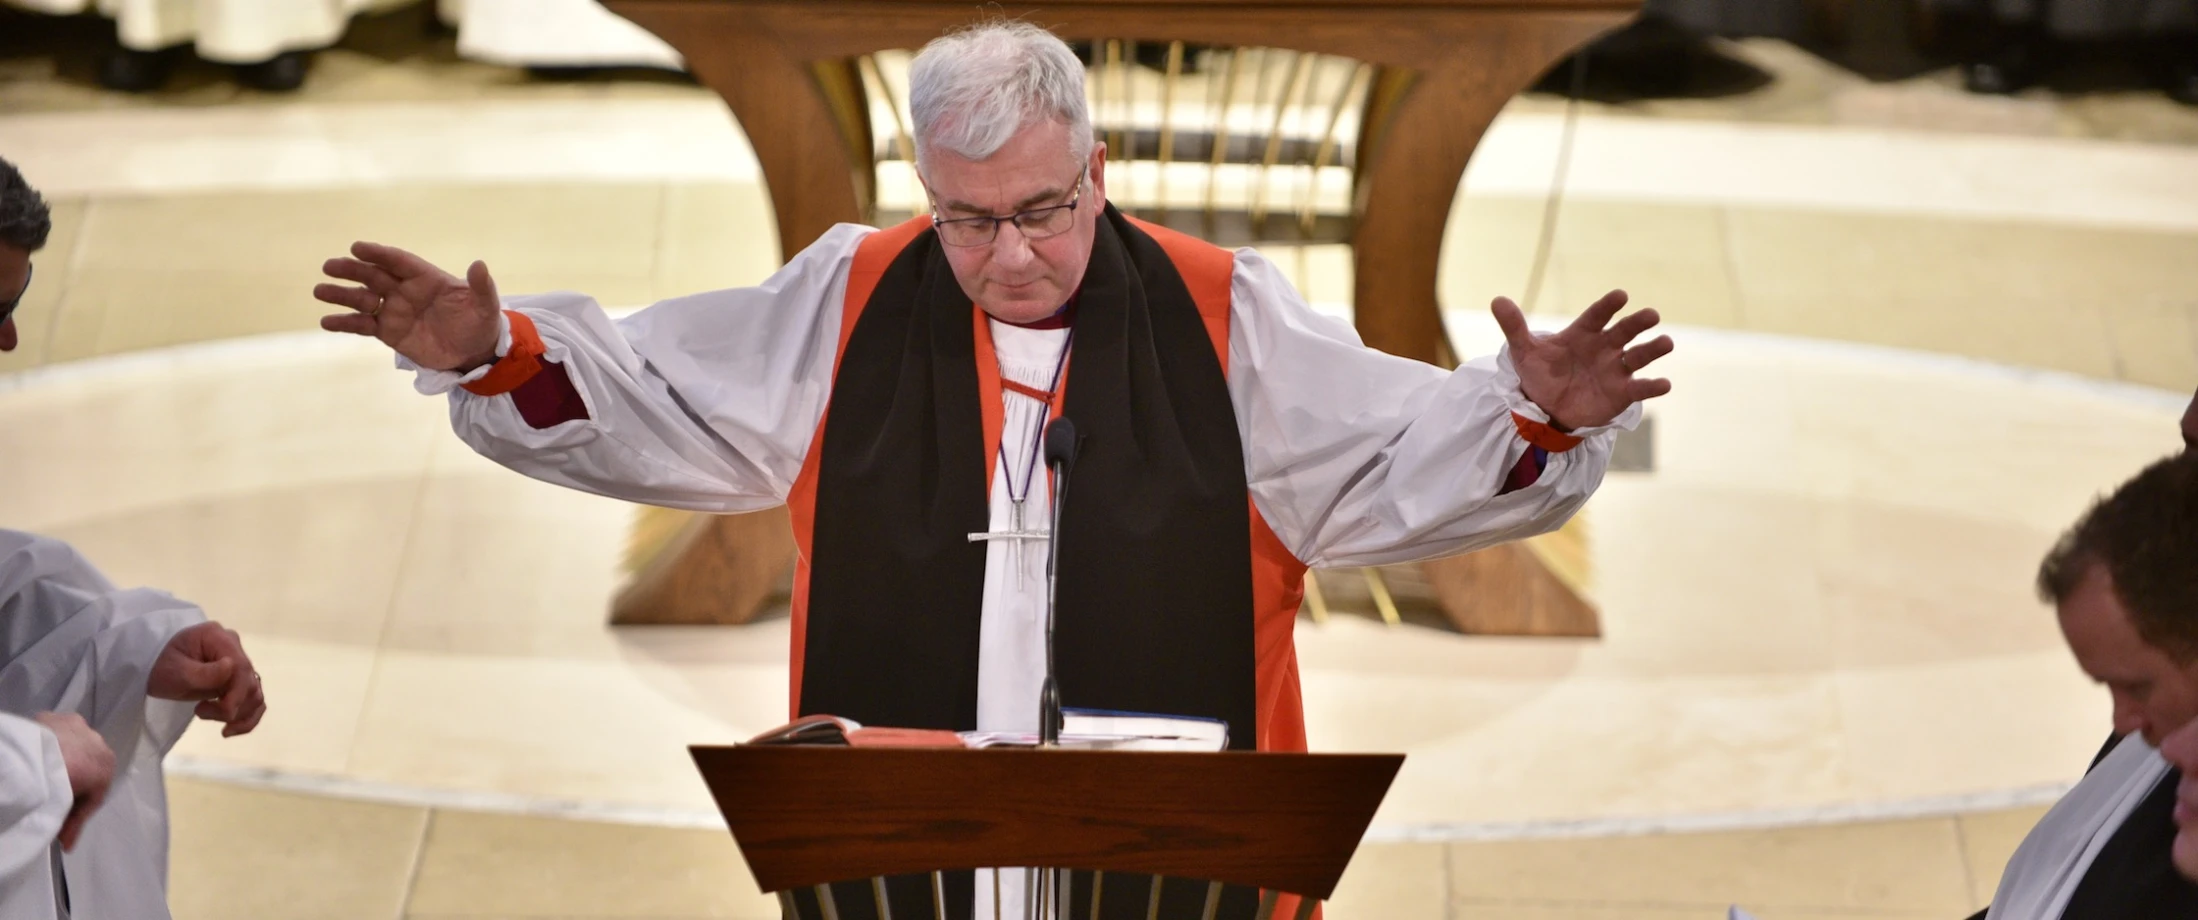 Bishop David: “Make God’s word known everywhere and to all.”